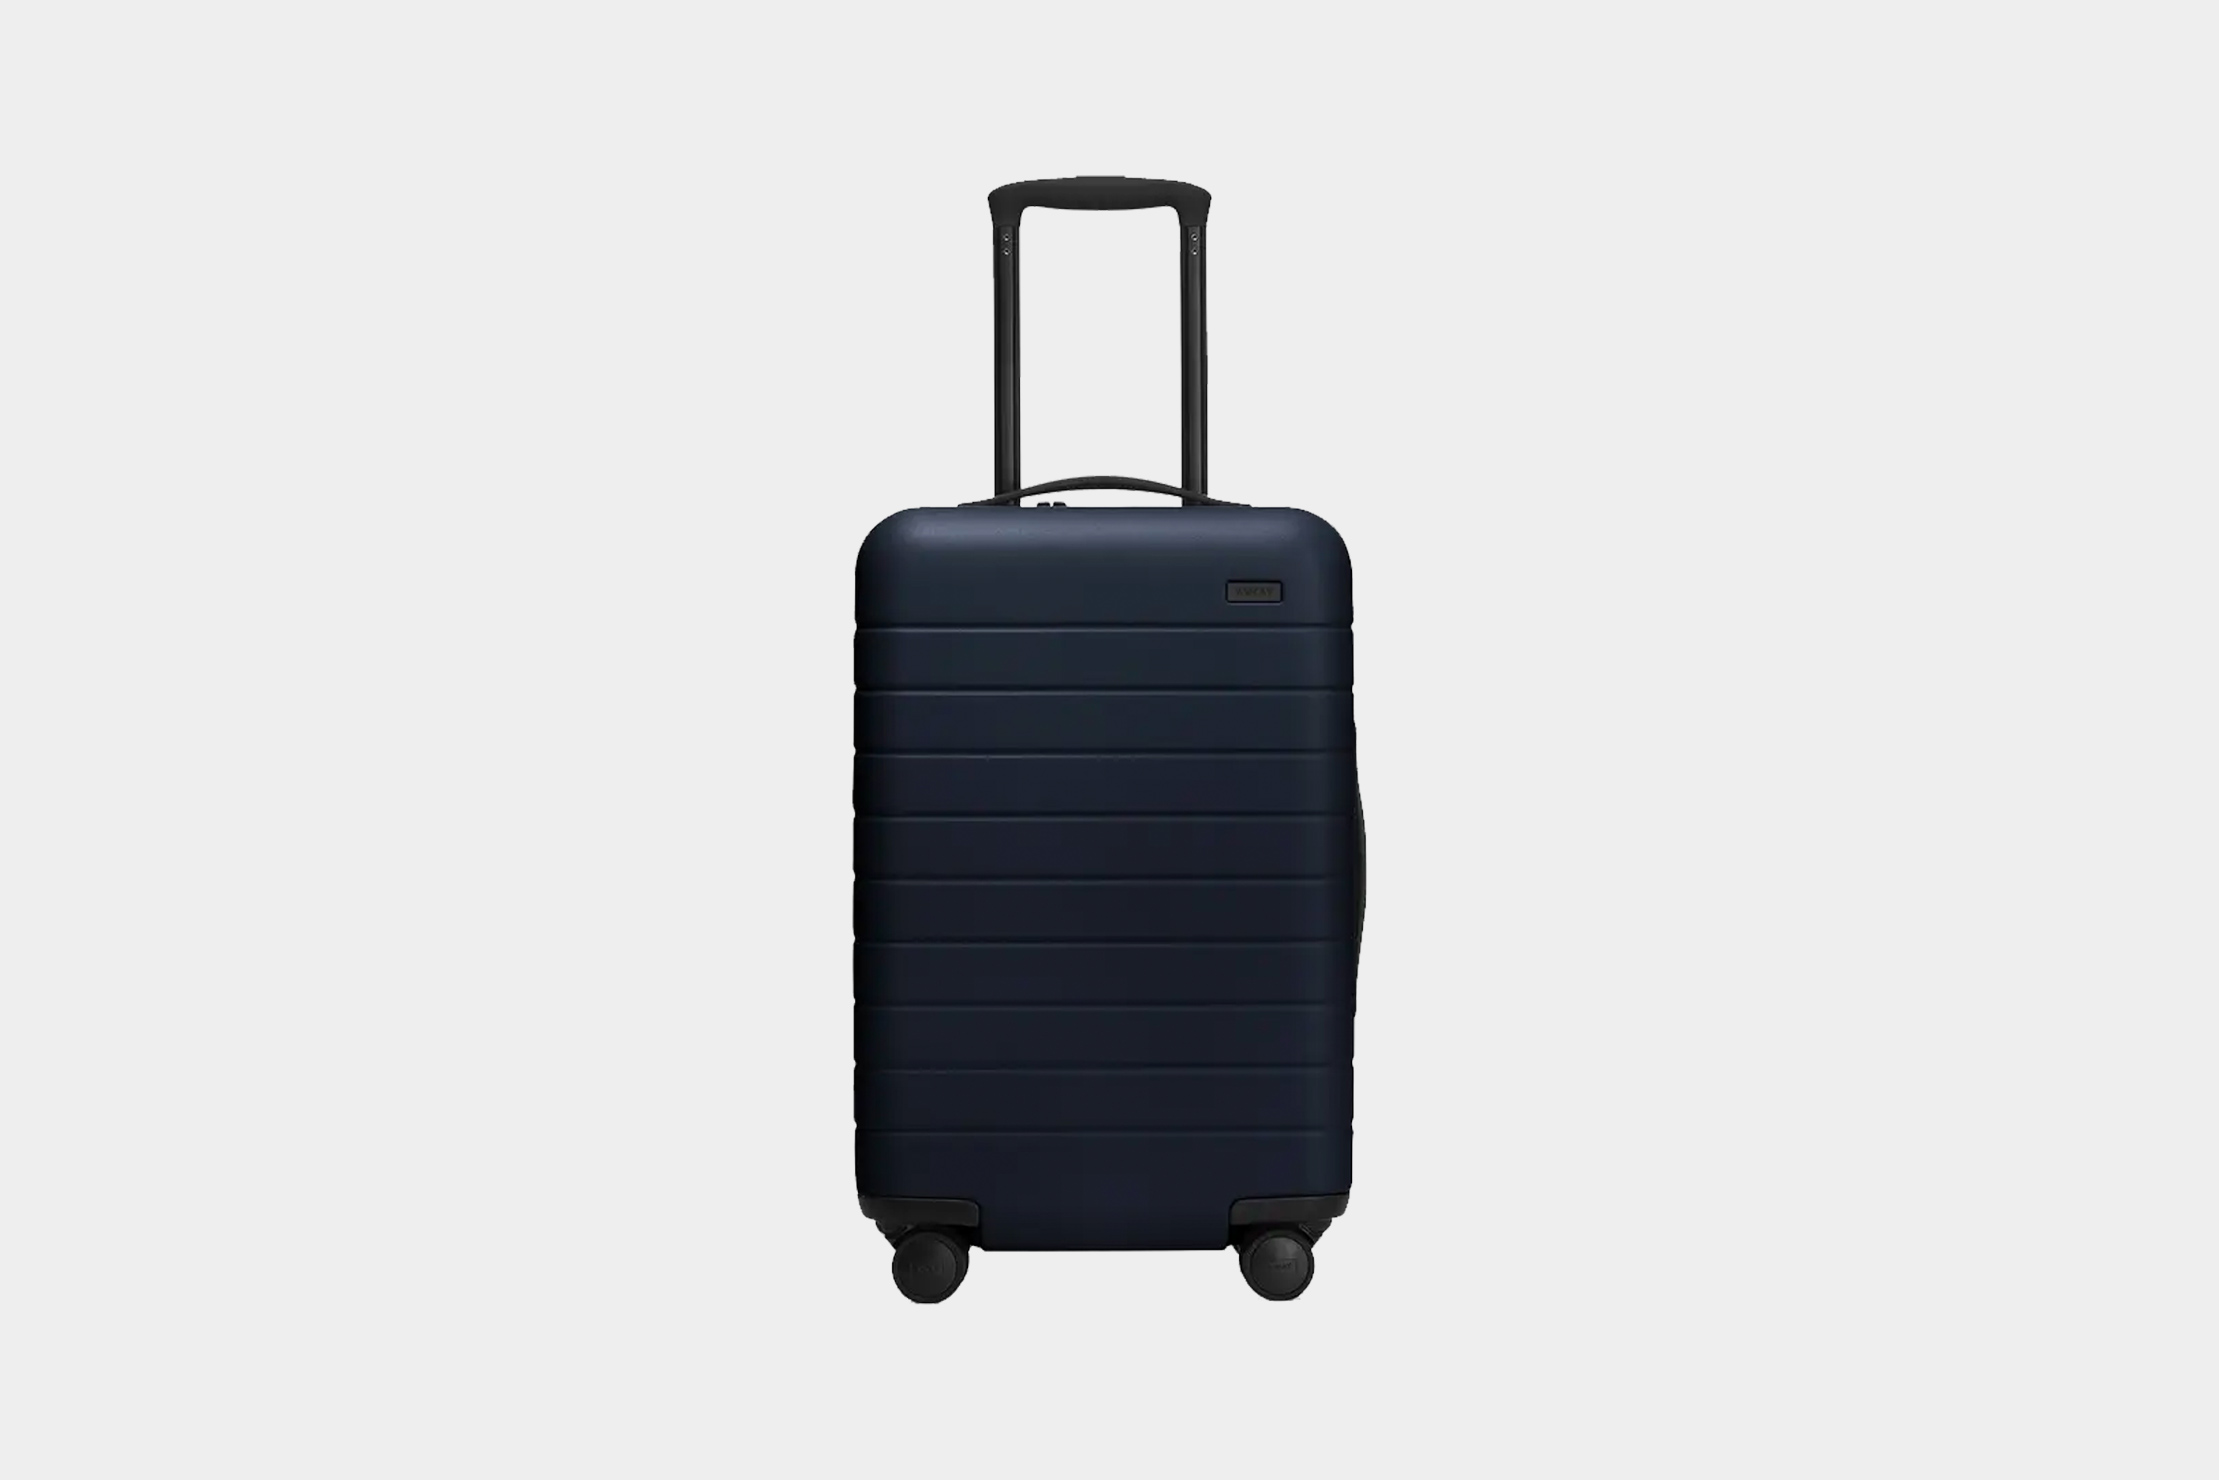 Away Bigger Carry-on Review: Pros and Cons of the Popular Luggage Brand